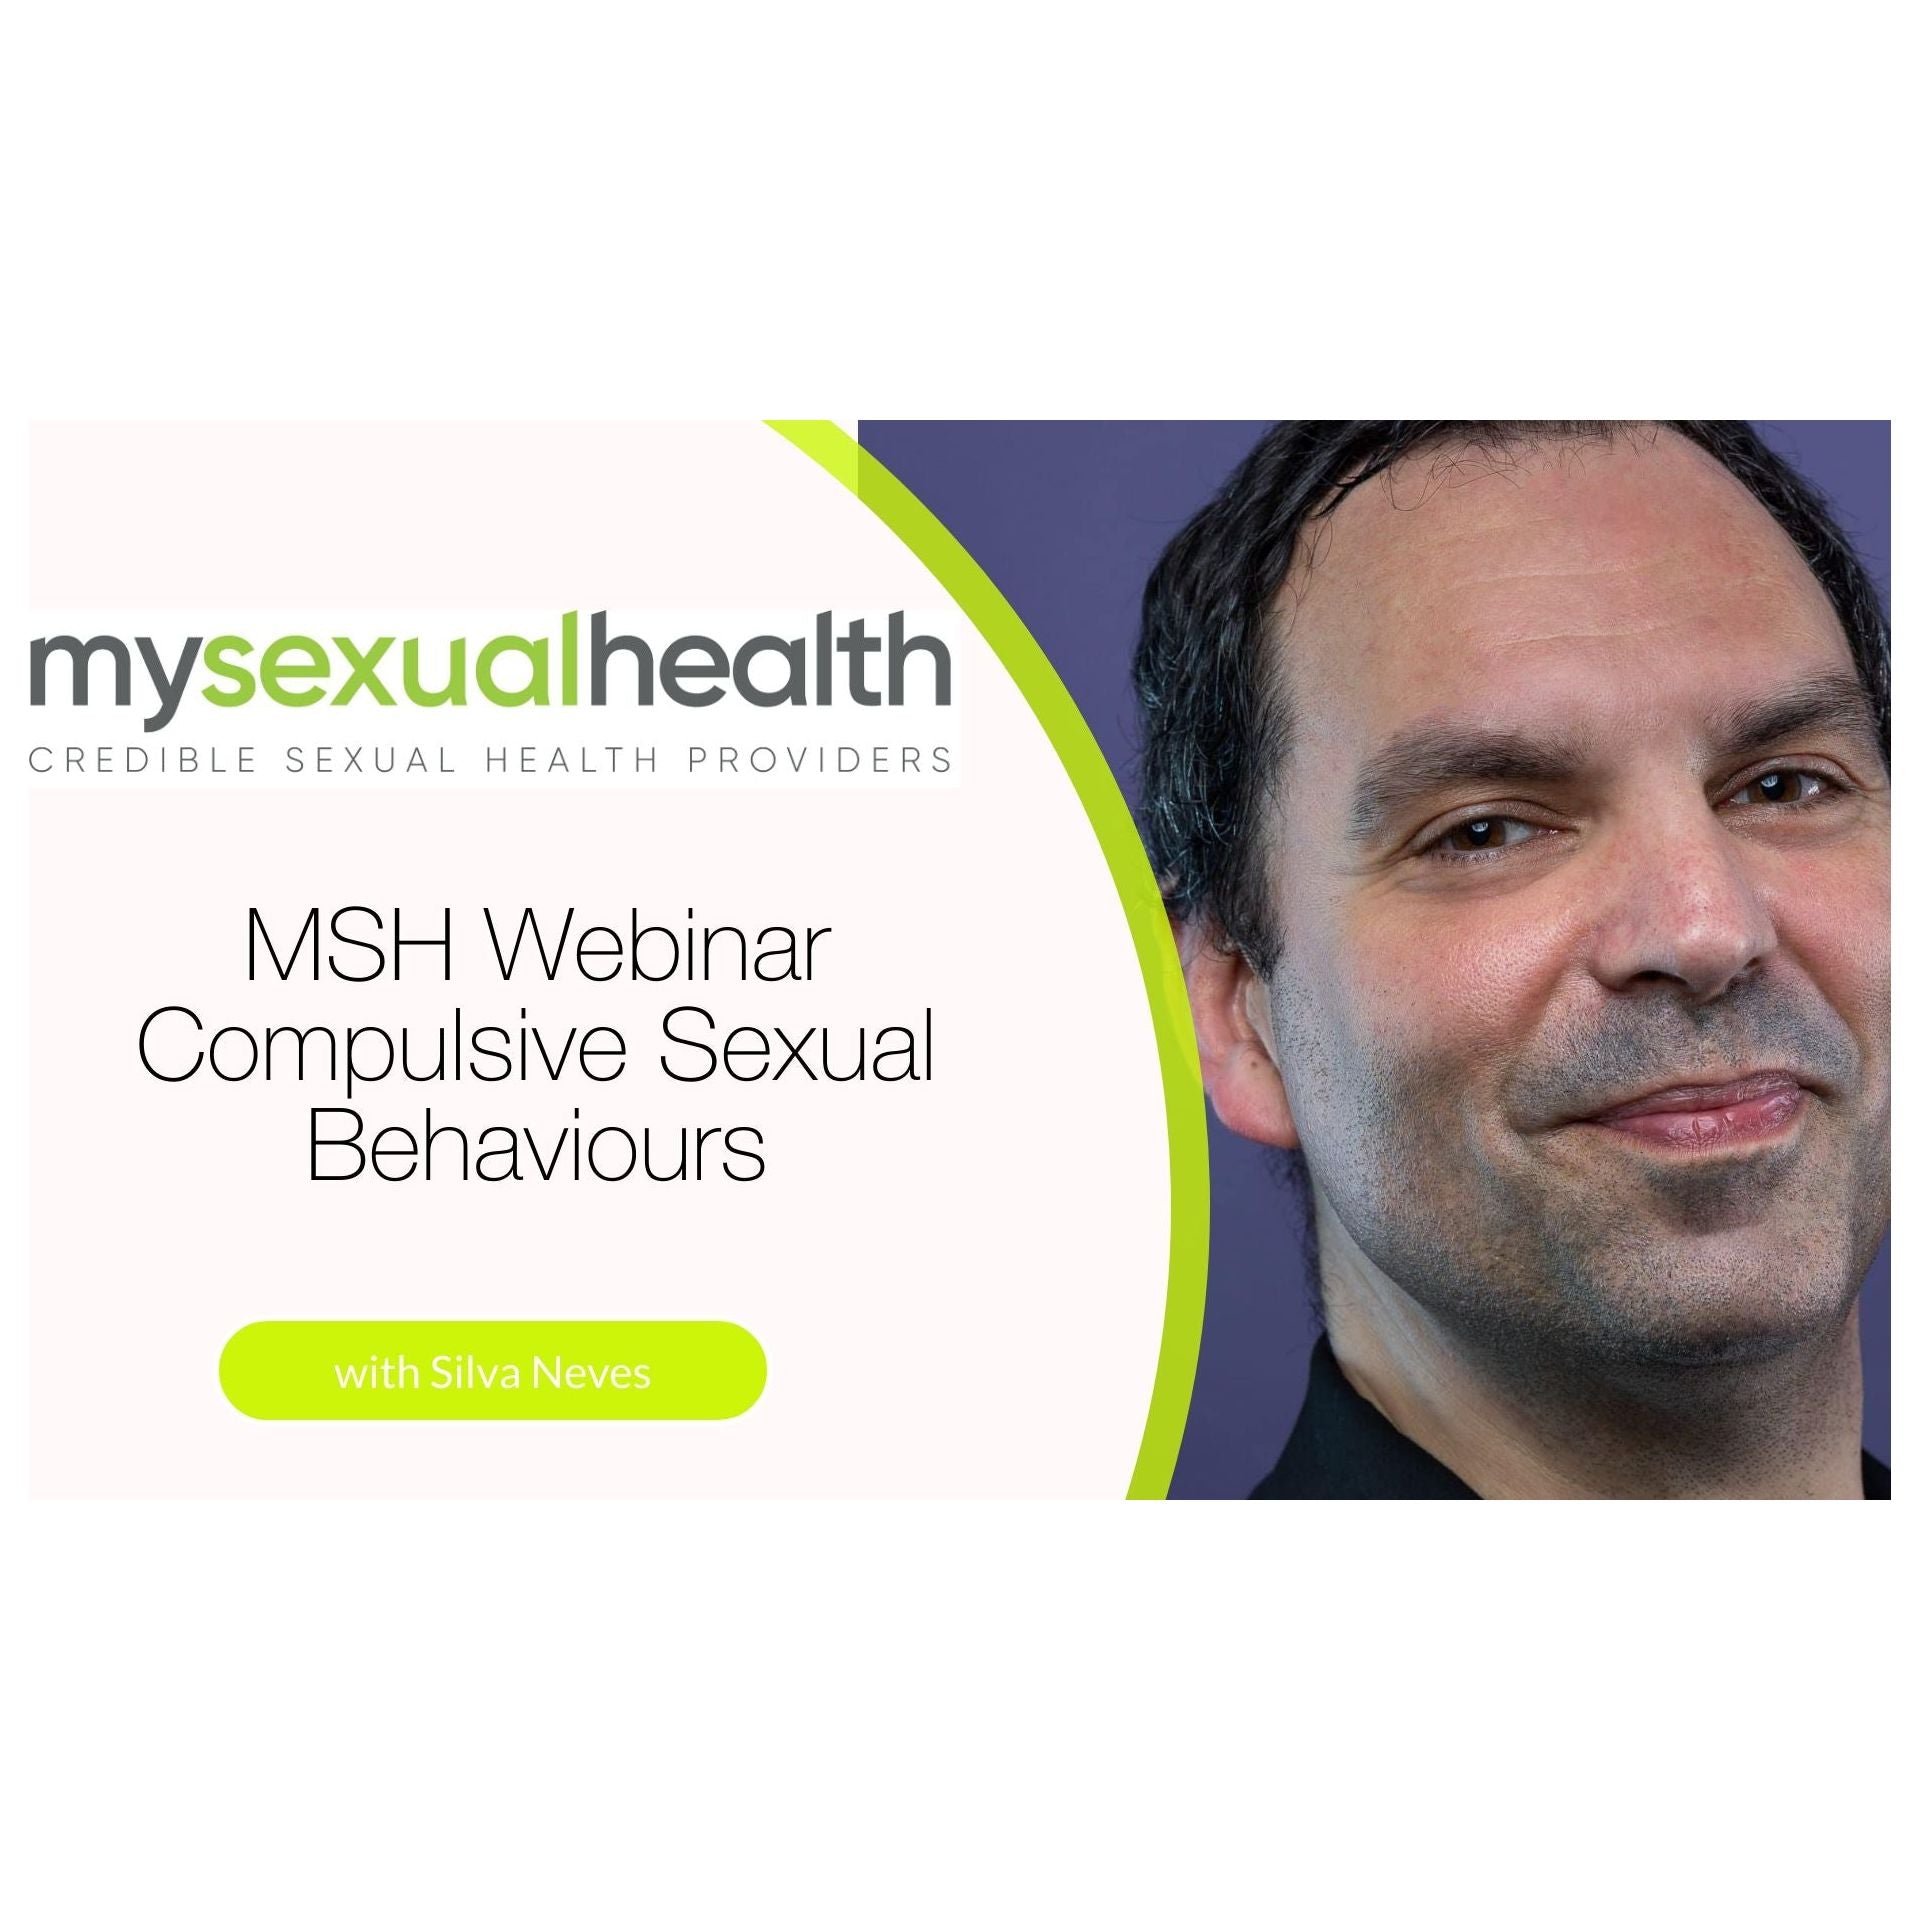 MSH WEBINAR: Compulsive Sexual Behaviours with Silva Neves and Dr Elna Rudolph